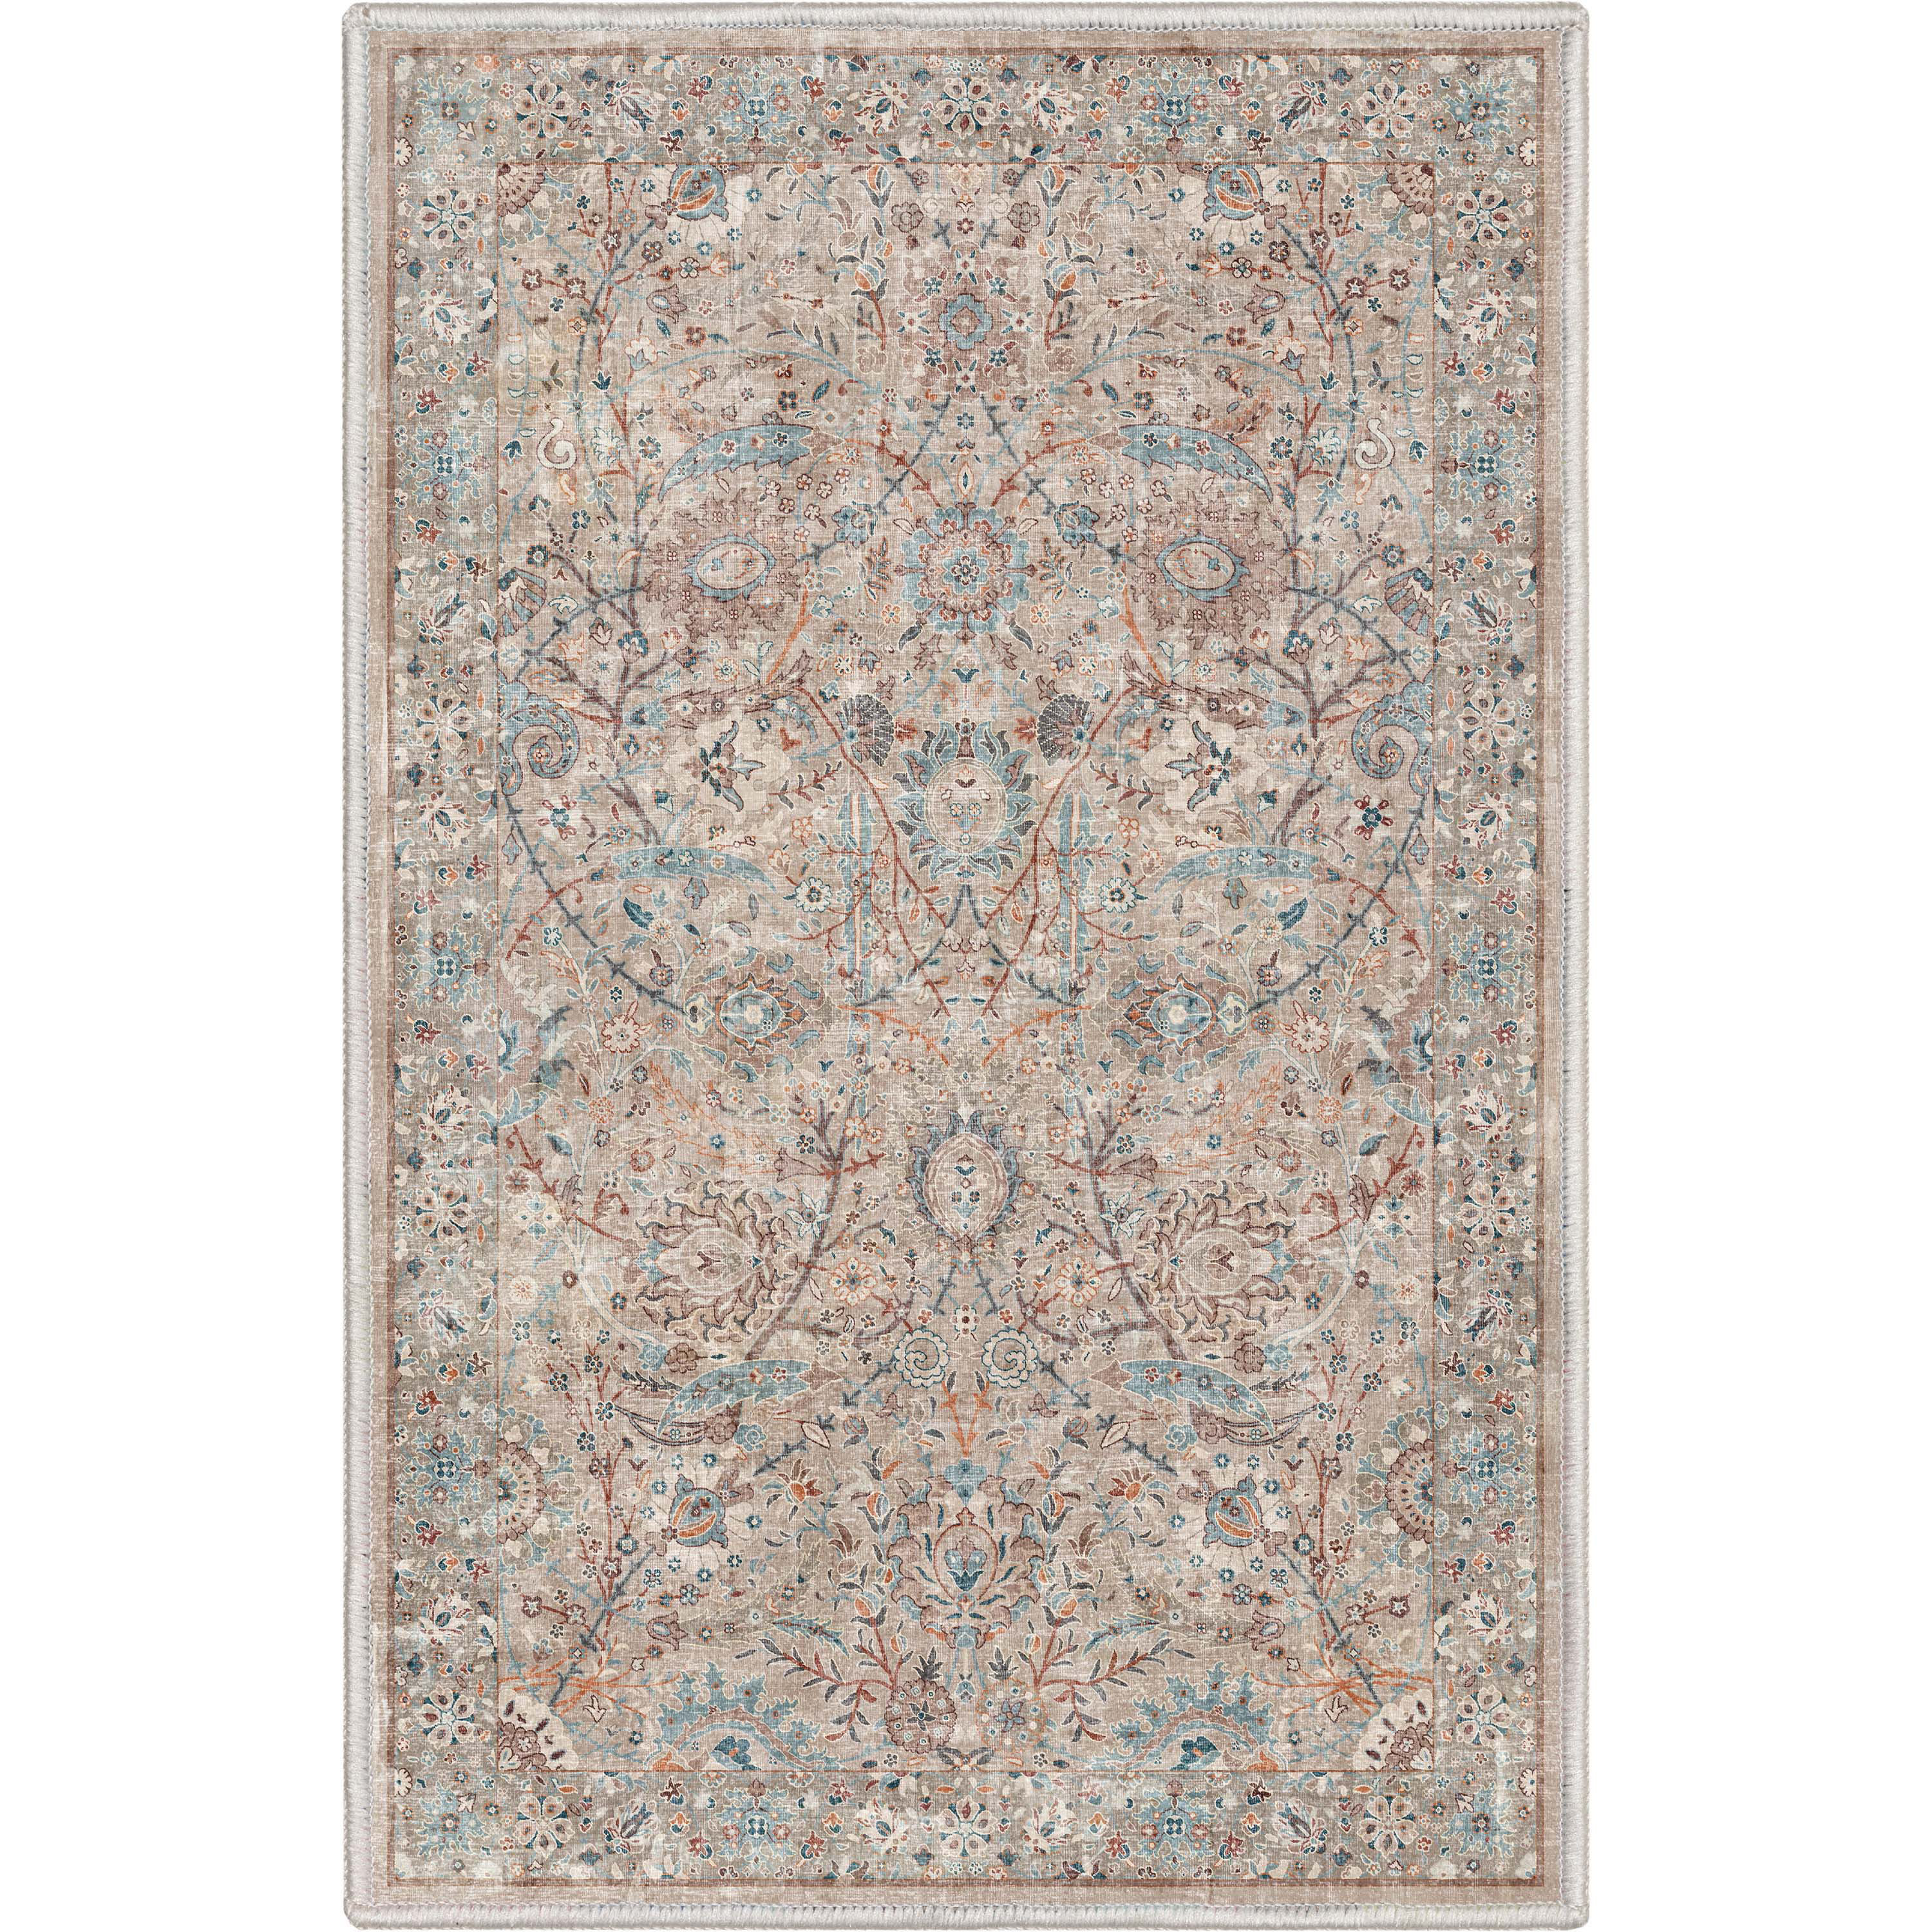 Well Woven Emilia Vintage Persian Floral Ivory Flat-Weave Thin Rug